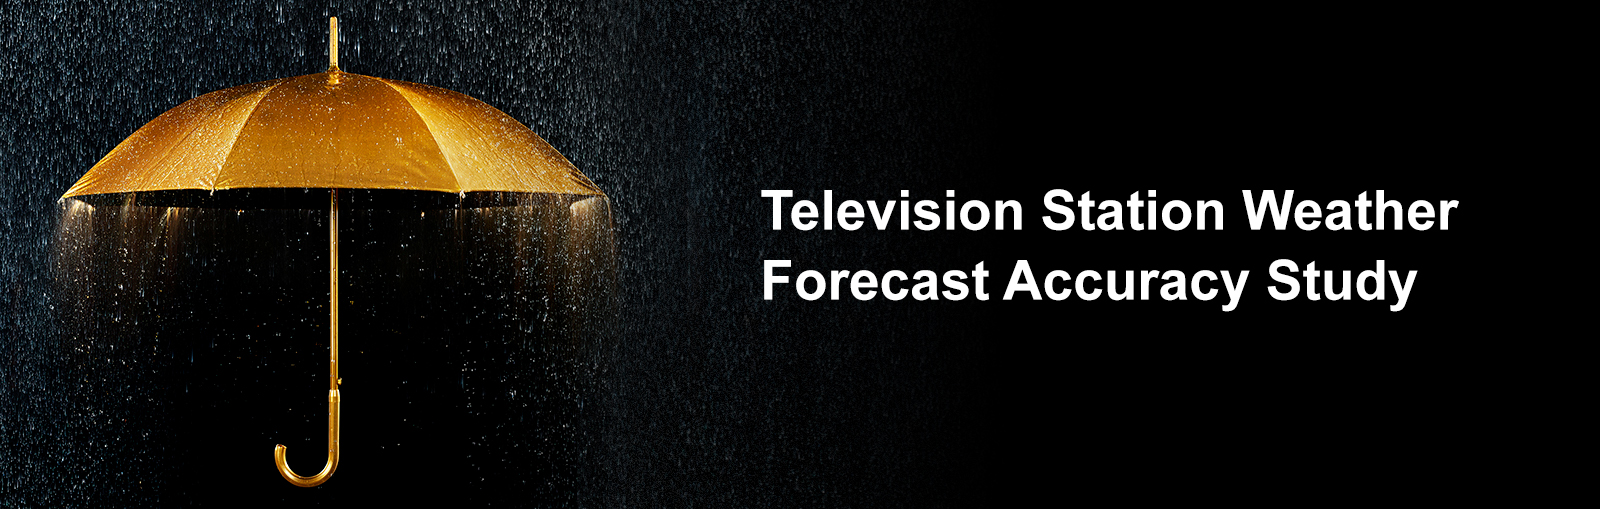 Television Station Weather Forecast Accuracy Study